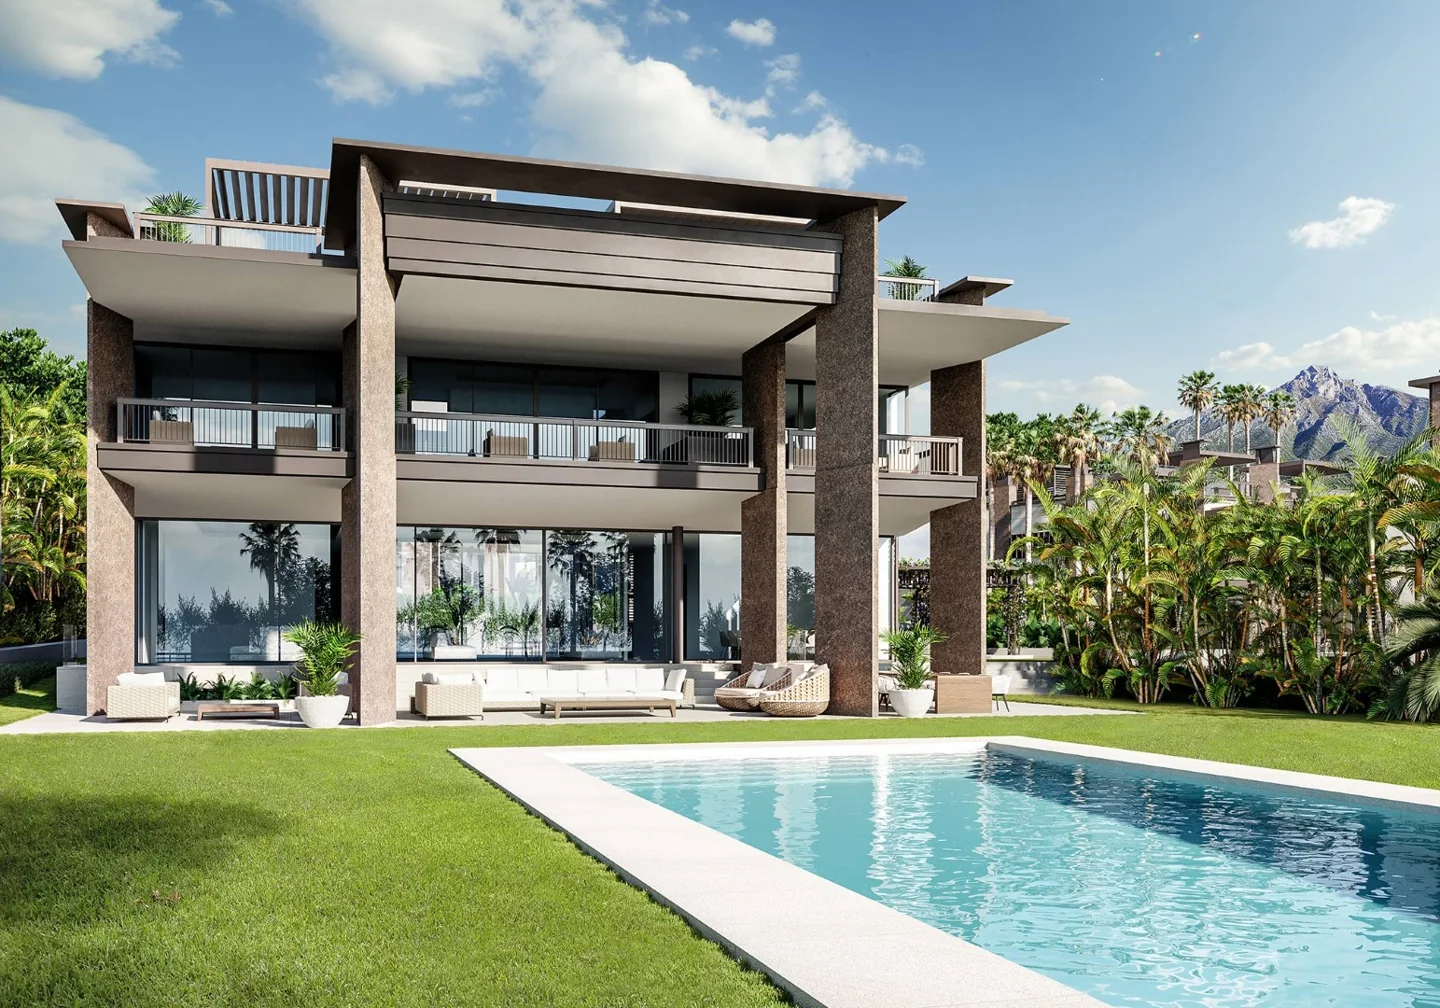 Villas Project in Nueva Andalucia, steps away from Puerto Banus